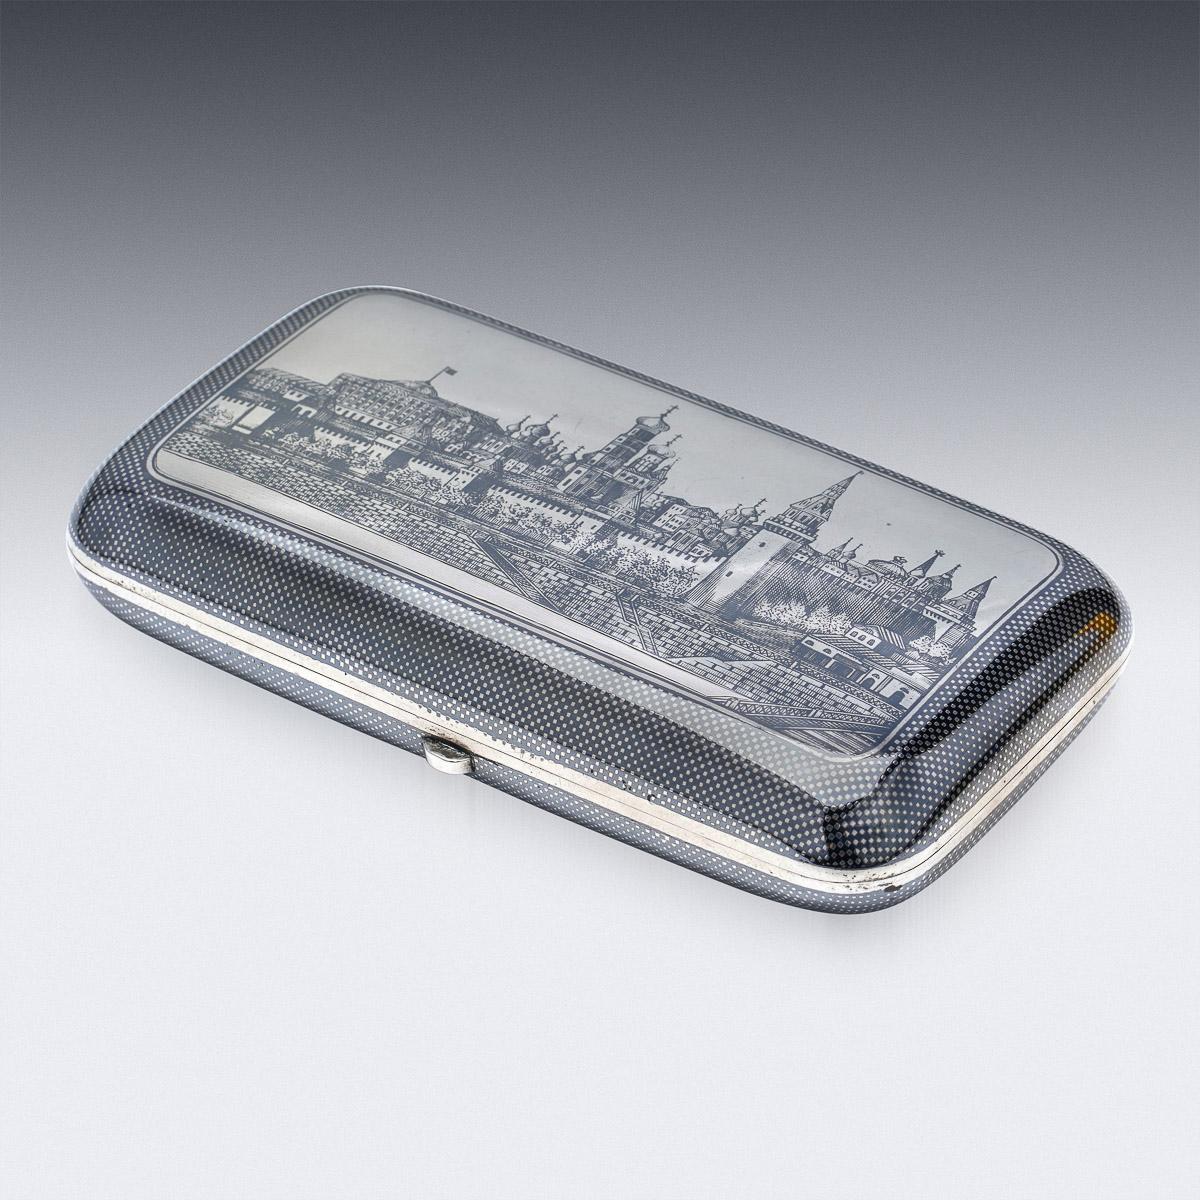 19th Century Russian silver & niello enamel large cigarette case, parcel gilt, each side decorated with a niello enamel decoration, the cover depicting view of the Kremlin, reverse with a vacant cartoosh for the owners initials, the sprung hinge is